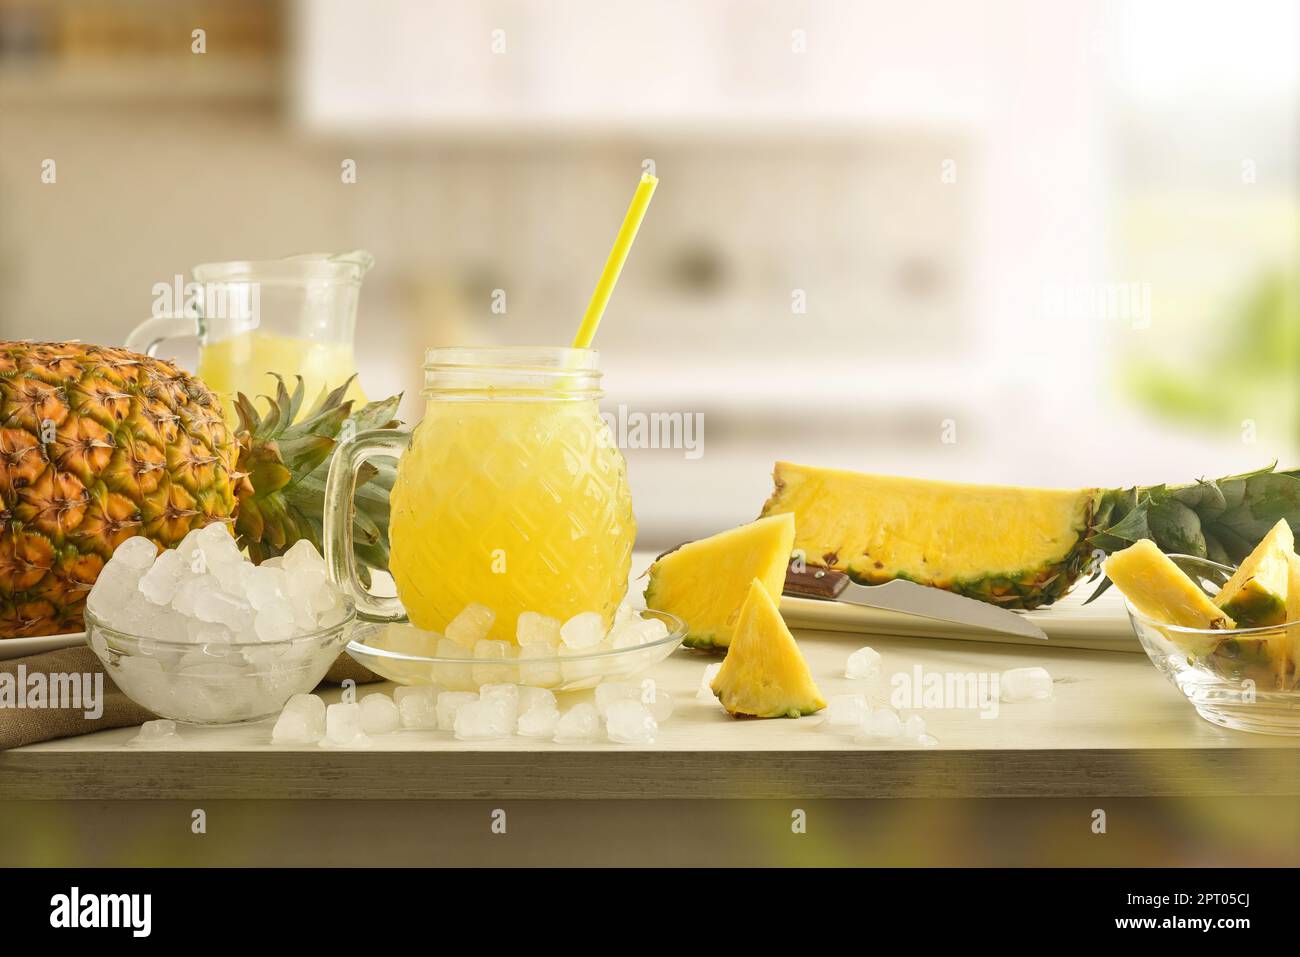 Full glass of pineapple drink with ice on table with crushed ice and fruit and kitchen background. Front view. Horizontal composition. Stock Photo